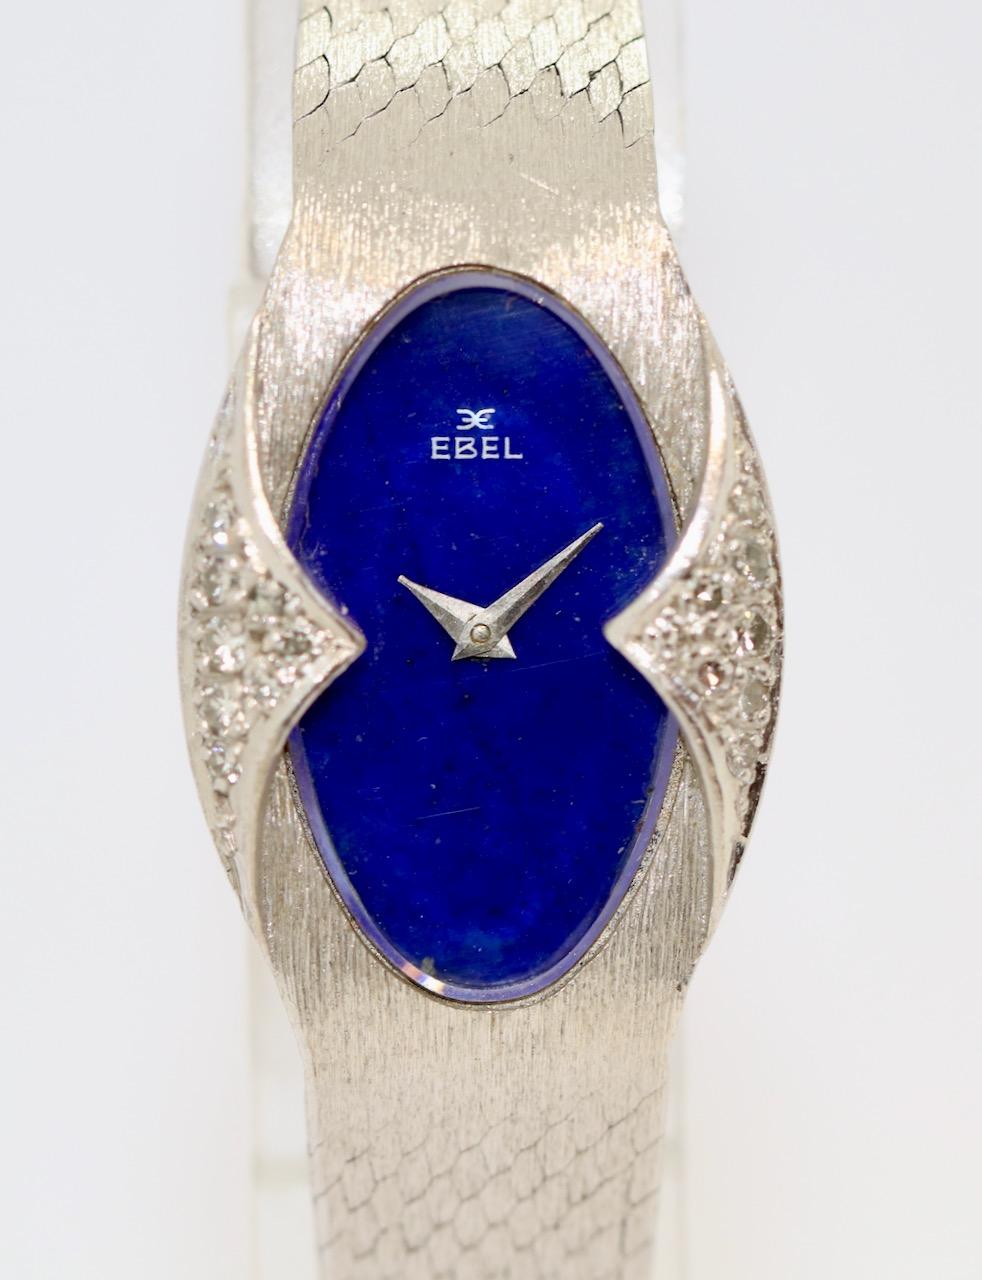 18 Karat White Gold Ladies Wrist Watch by EBEL, with Diamonds and Lapis Lazuli Dial

The bracelet has been lengthened. Can be shortened at any time if desired.

Includes certificate of authenticity.